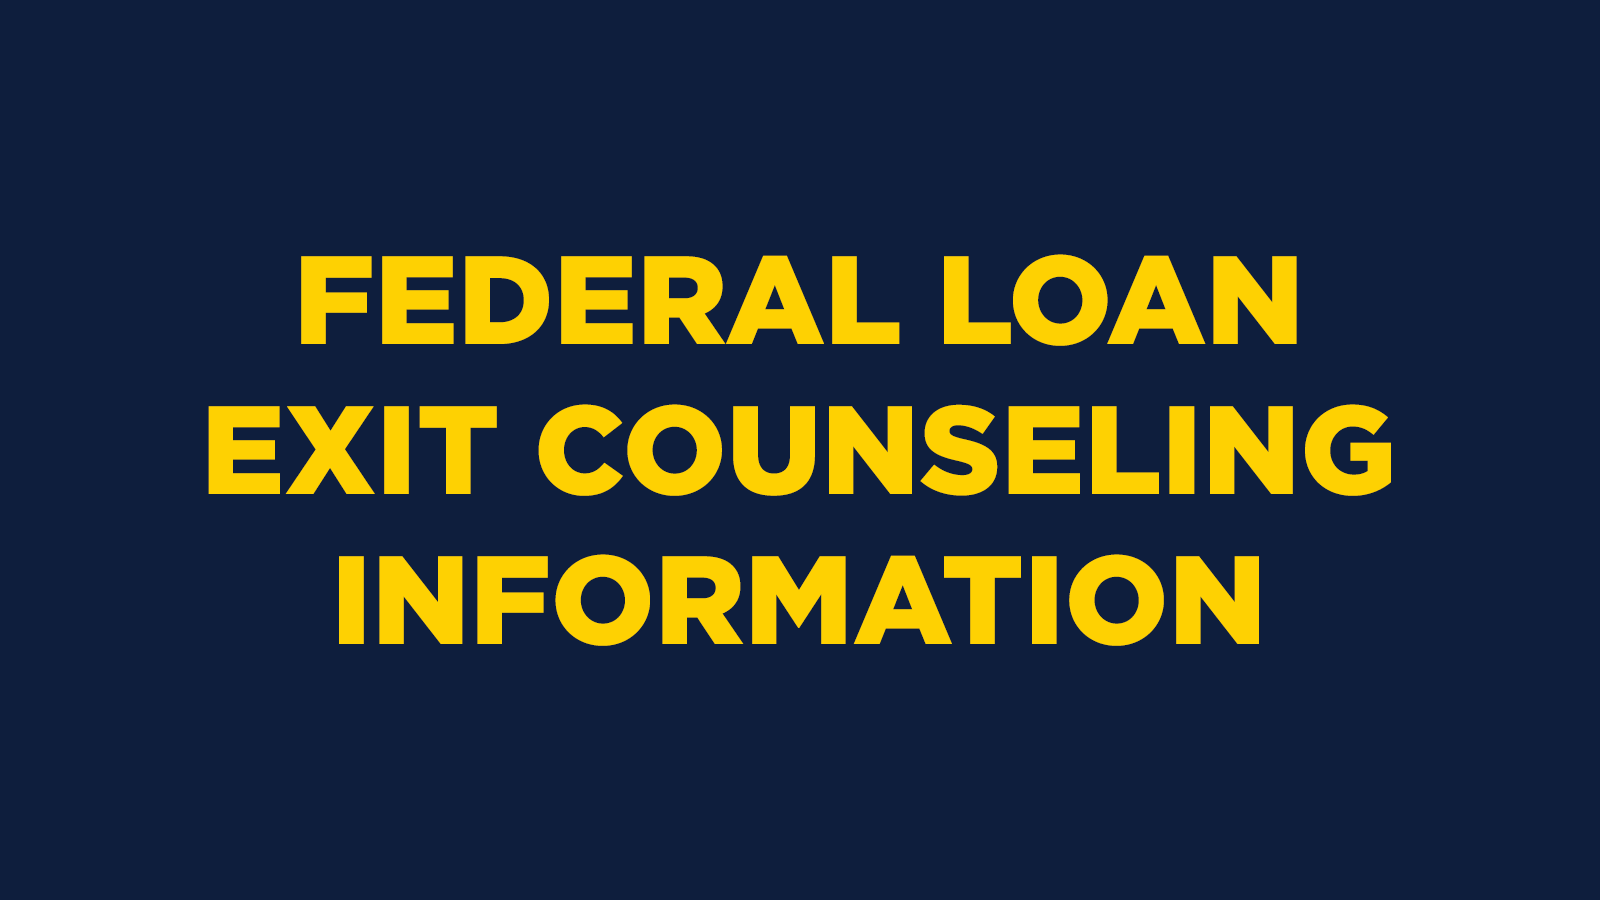 Federal Loan Exit Counseling Information